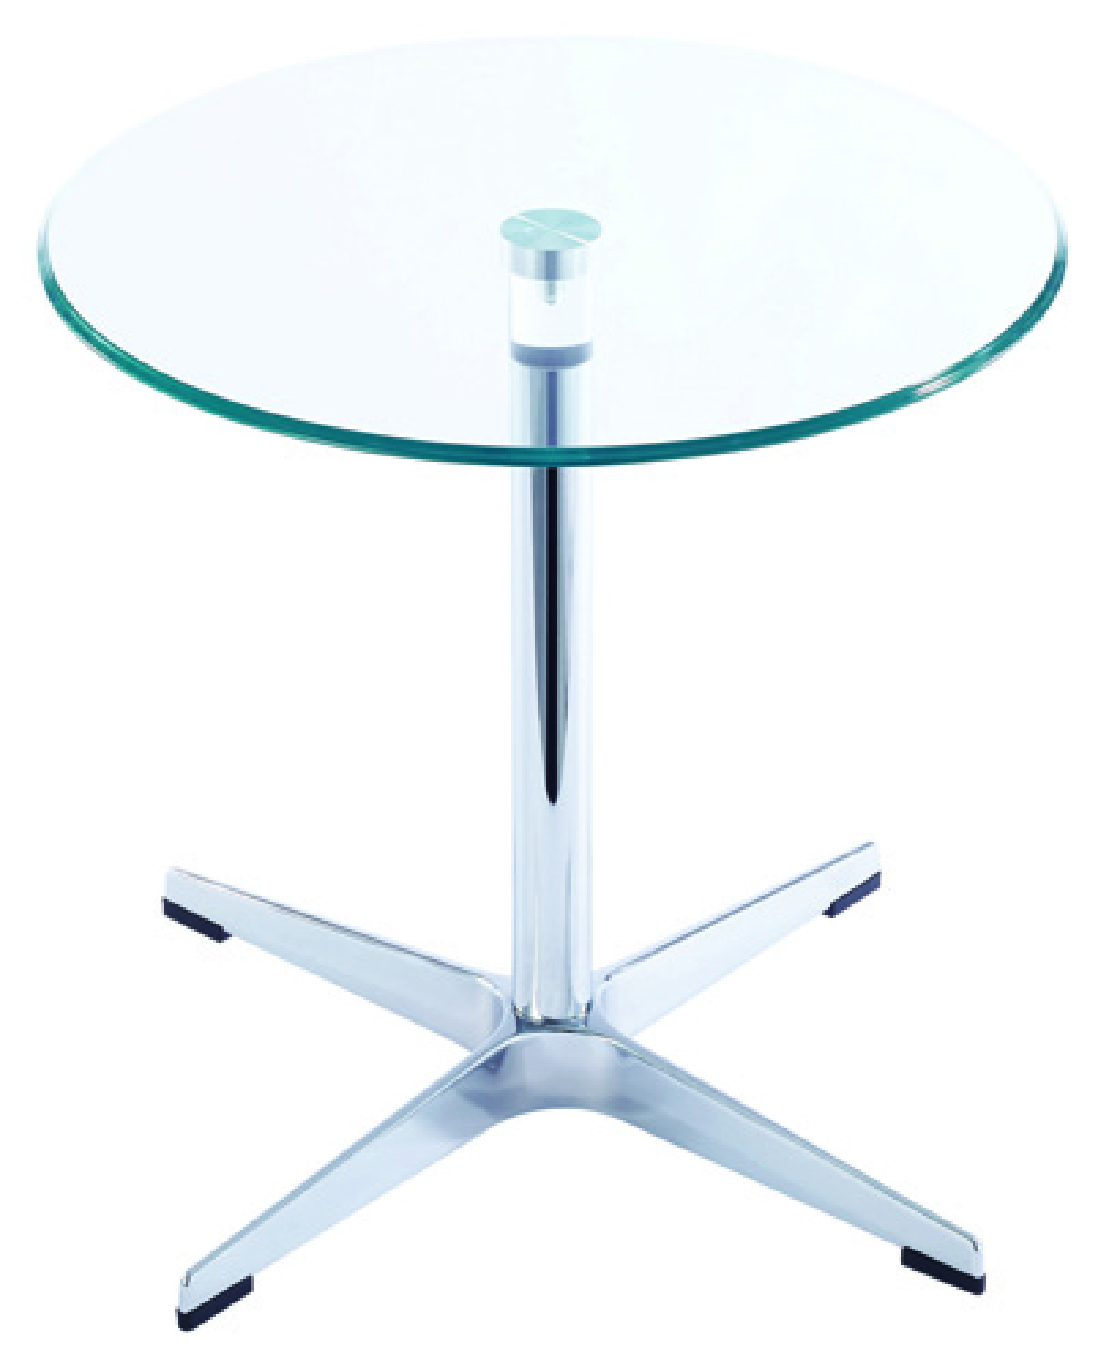 HJ-C94 glass dining table